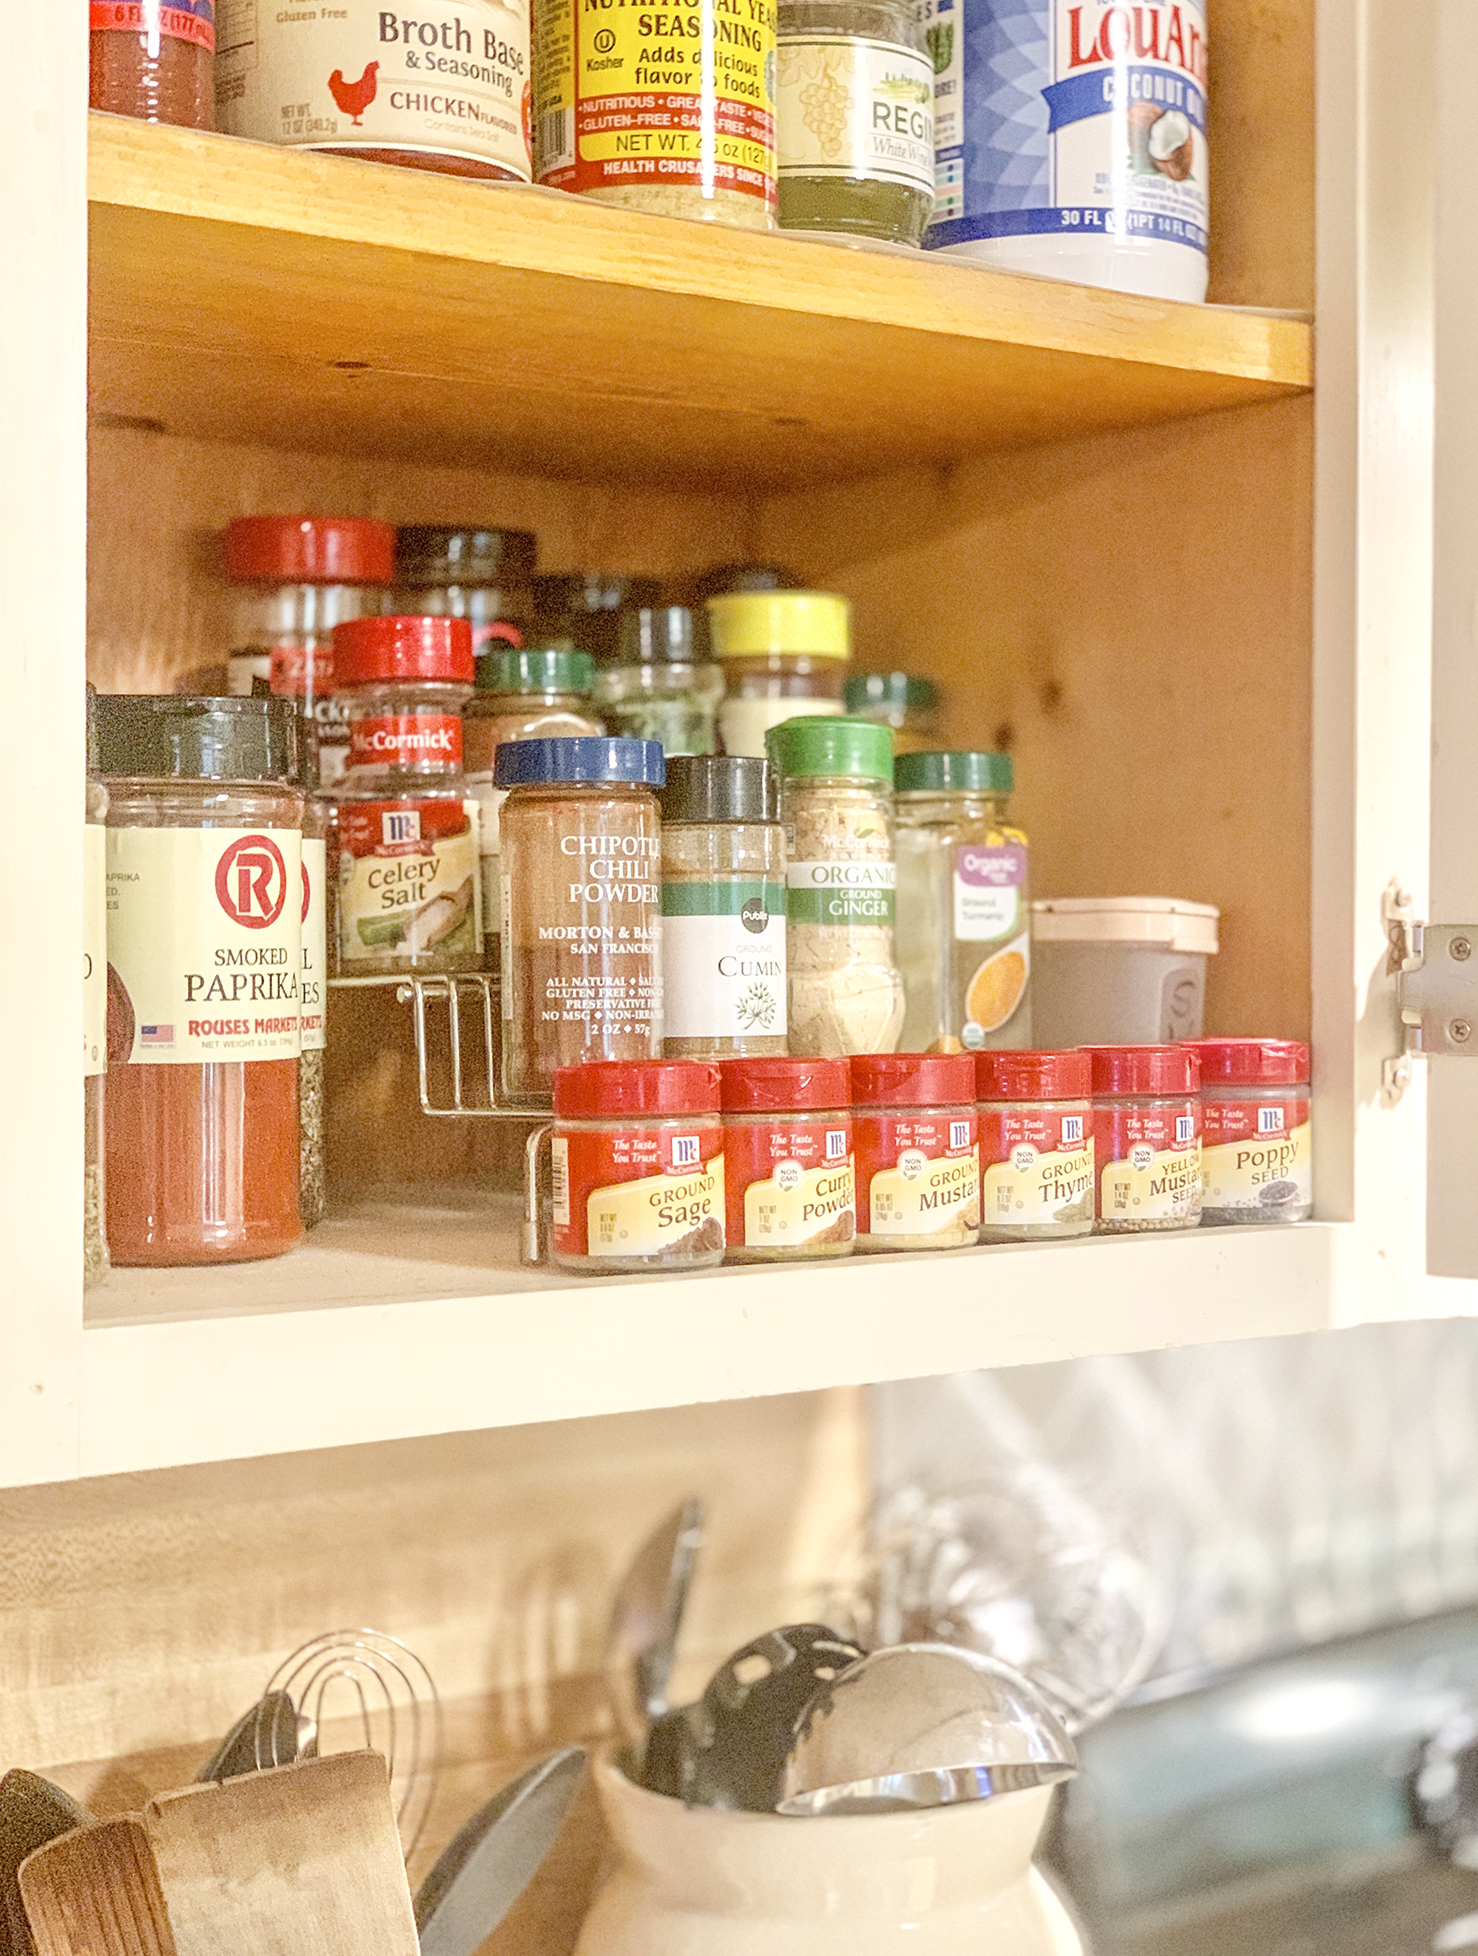 http://creativecajunmama.com/wp-content/uploads/2019/07/4-Tips-for-Organizing-Spices-2.jpg